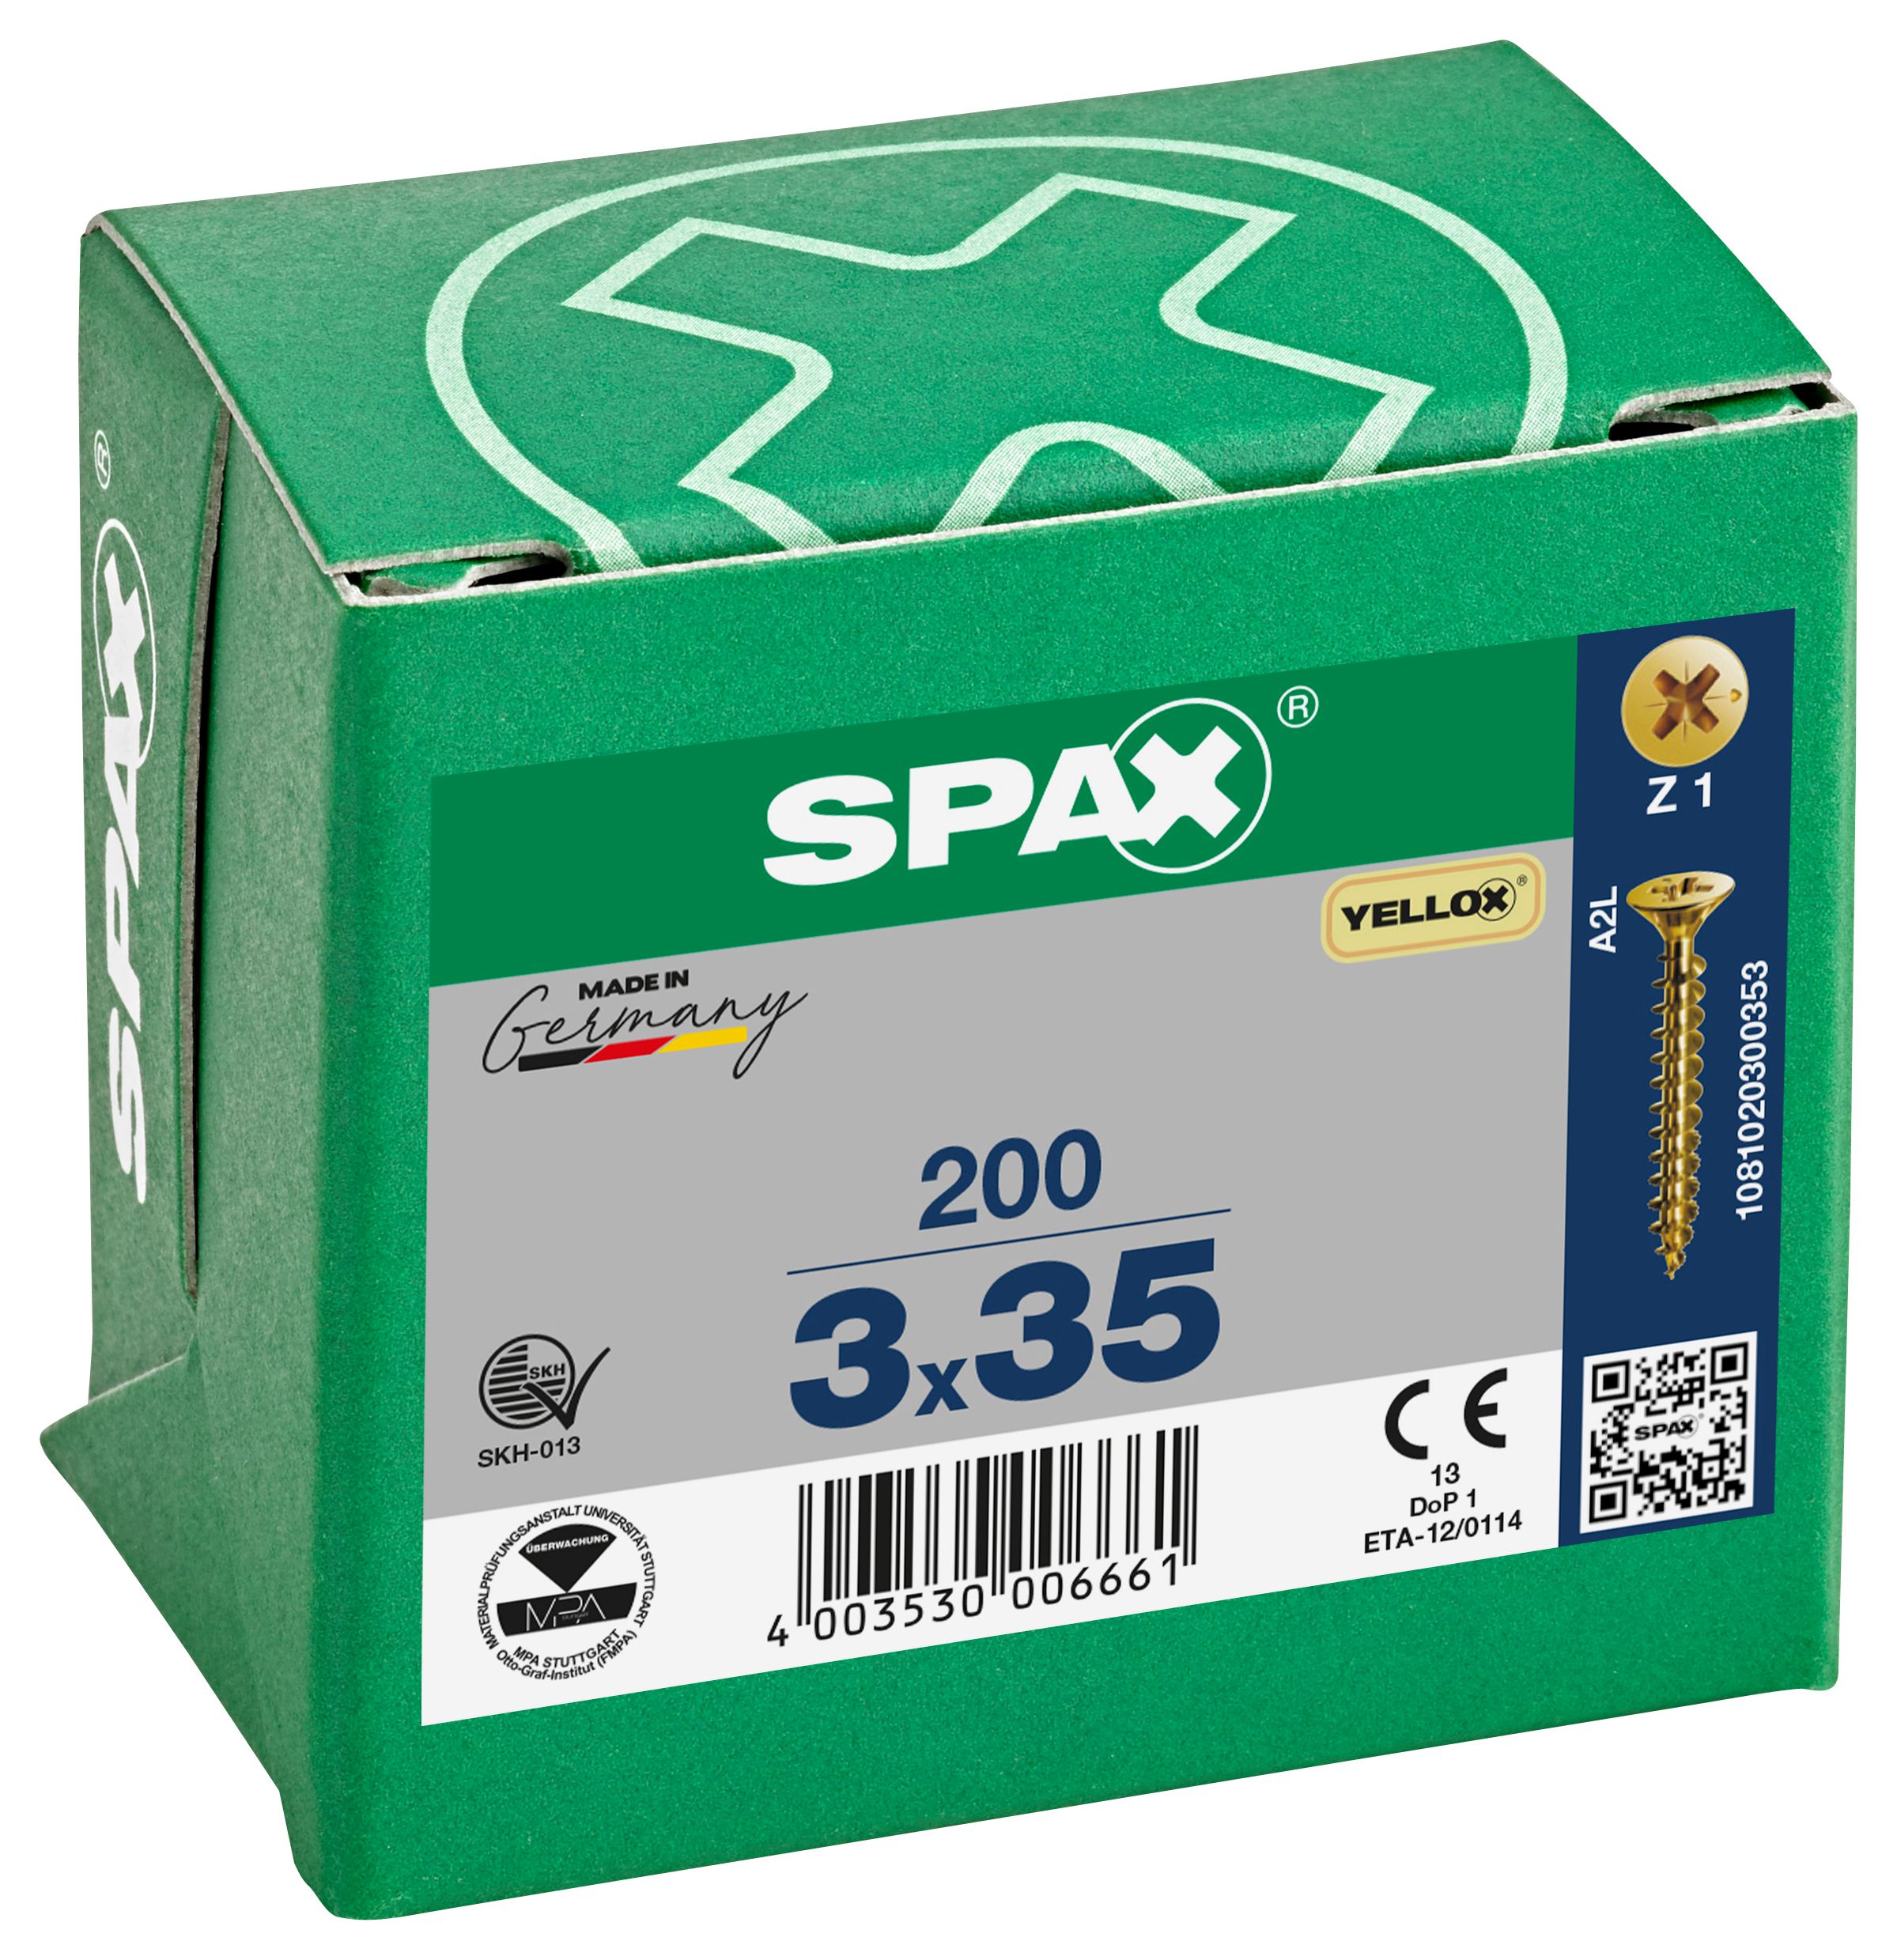 Image of Spax Pz Countersunk Yellox Screws - 3x35mm Pack Of 200